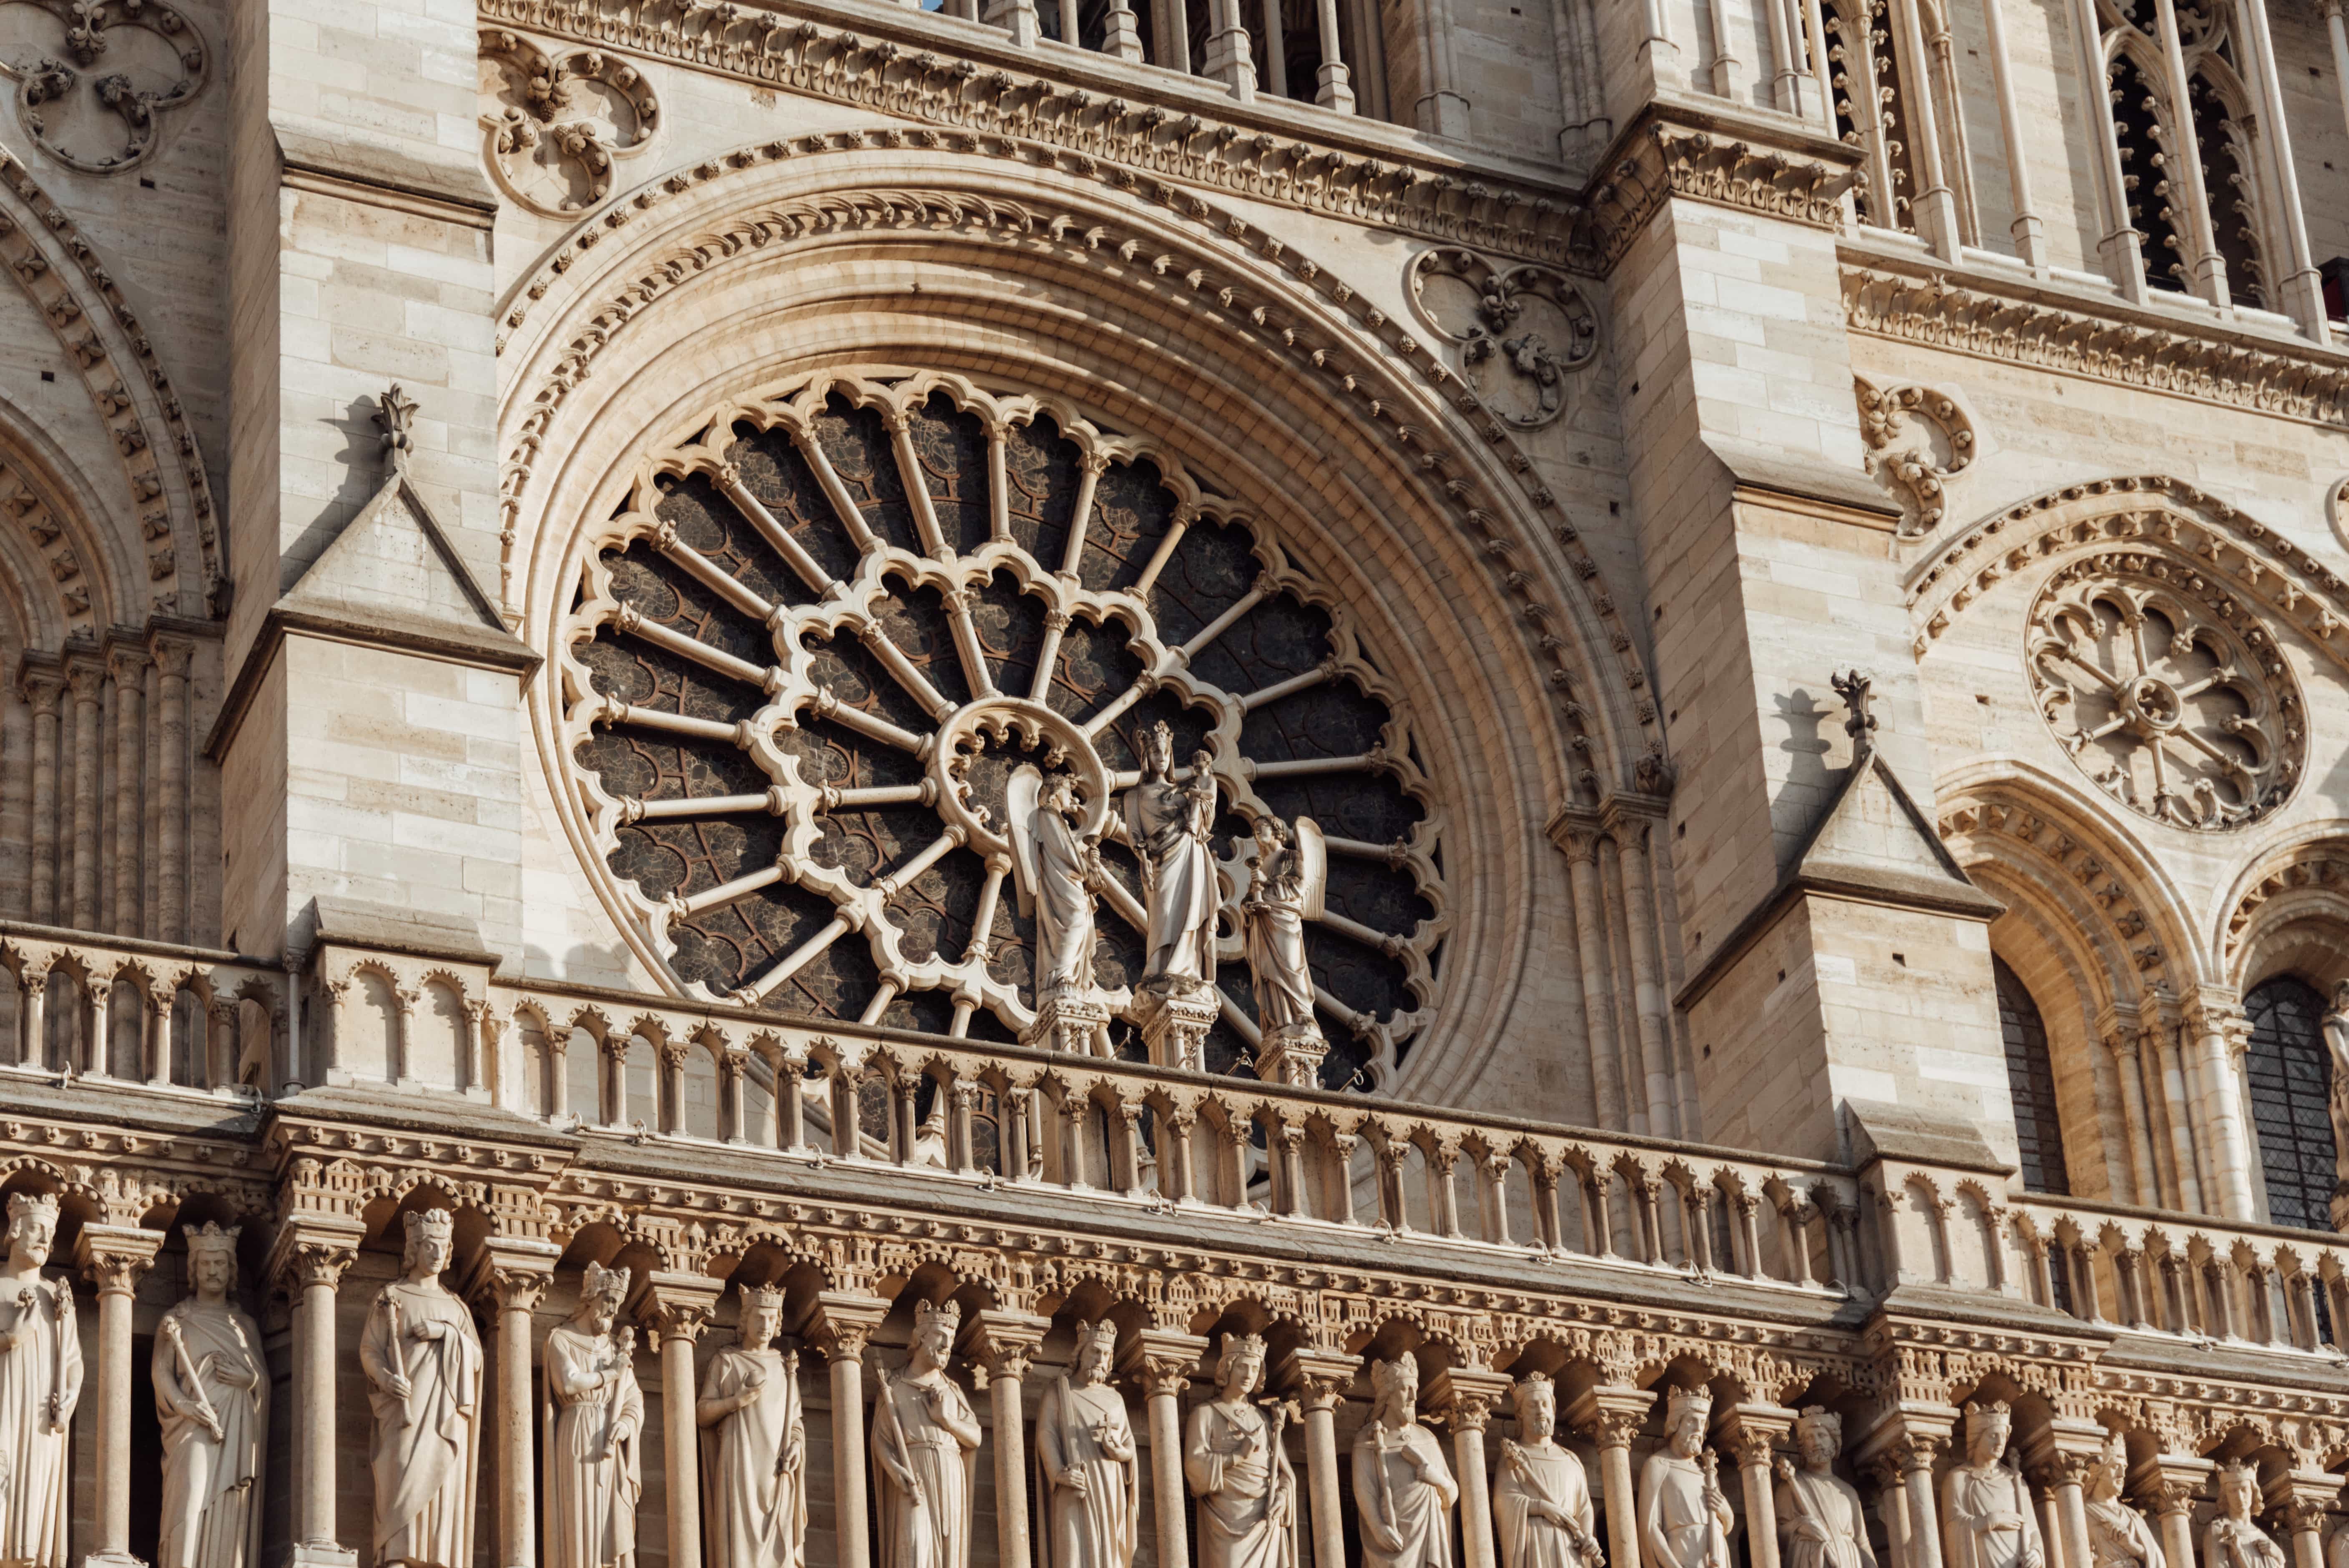 Most Instagrammable places in Paris, Notre Dame Cathedral